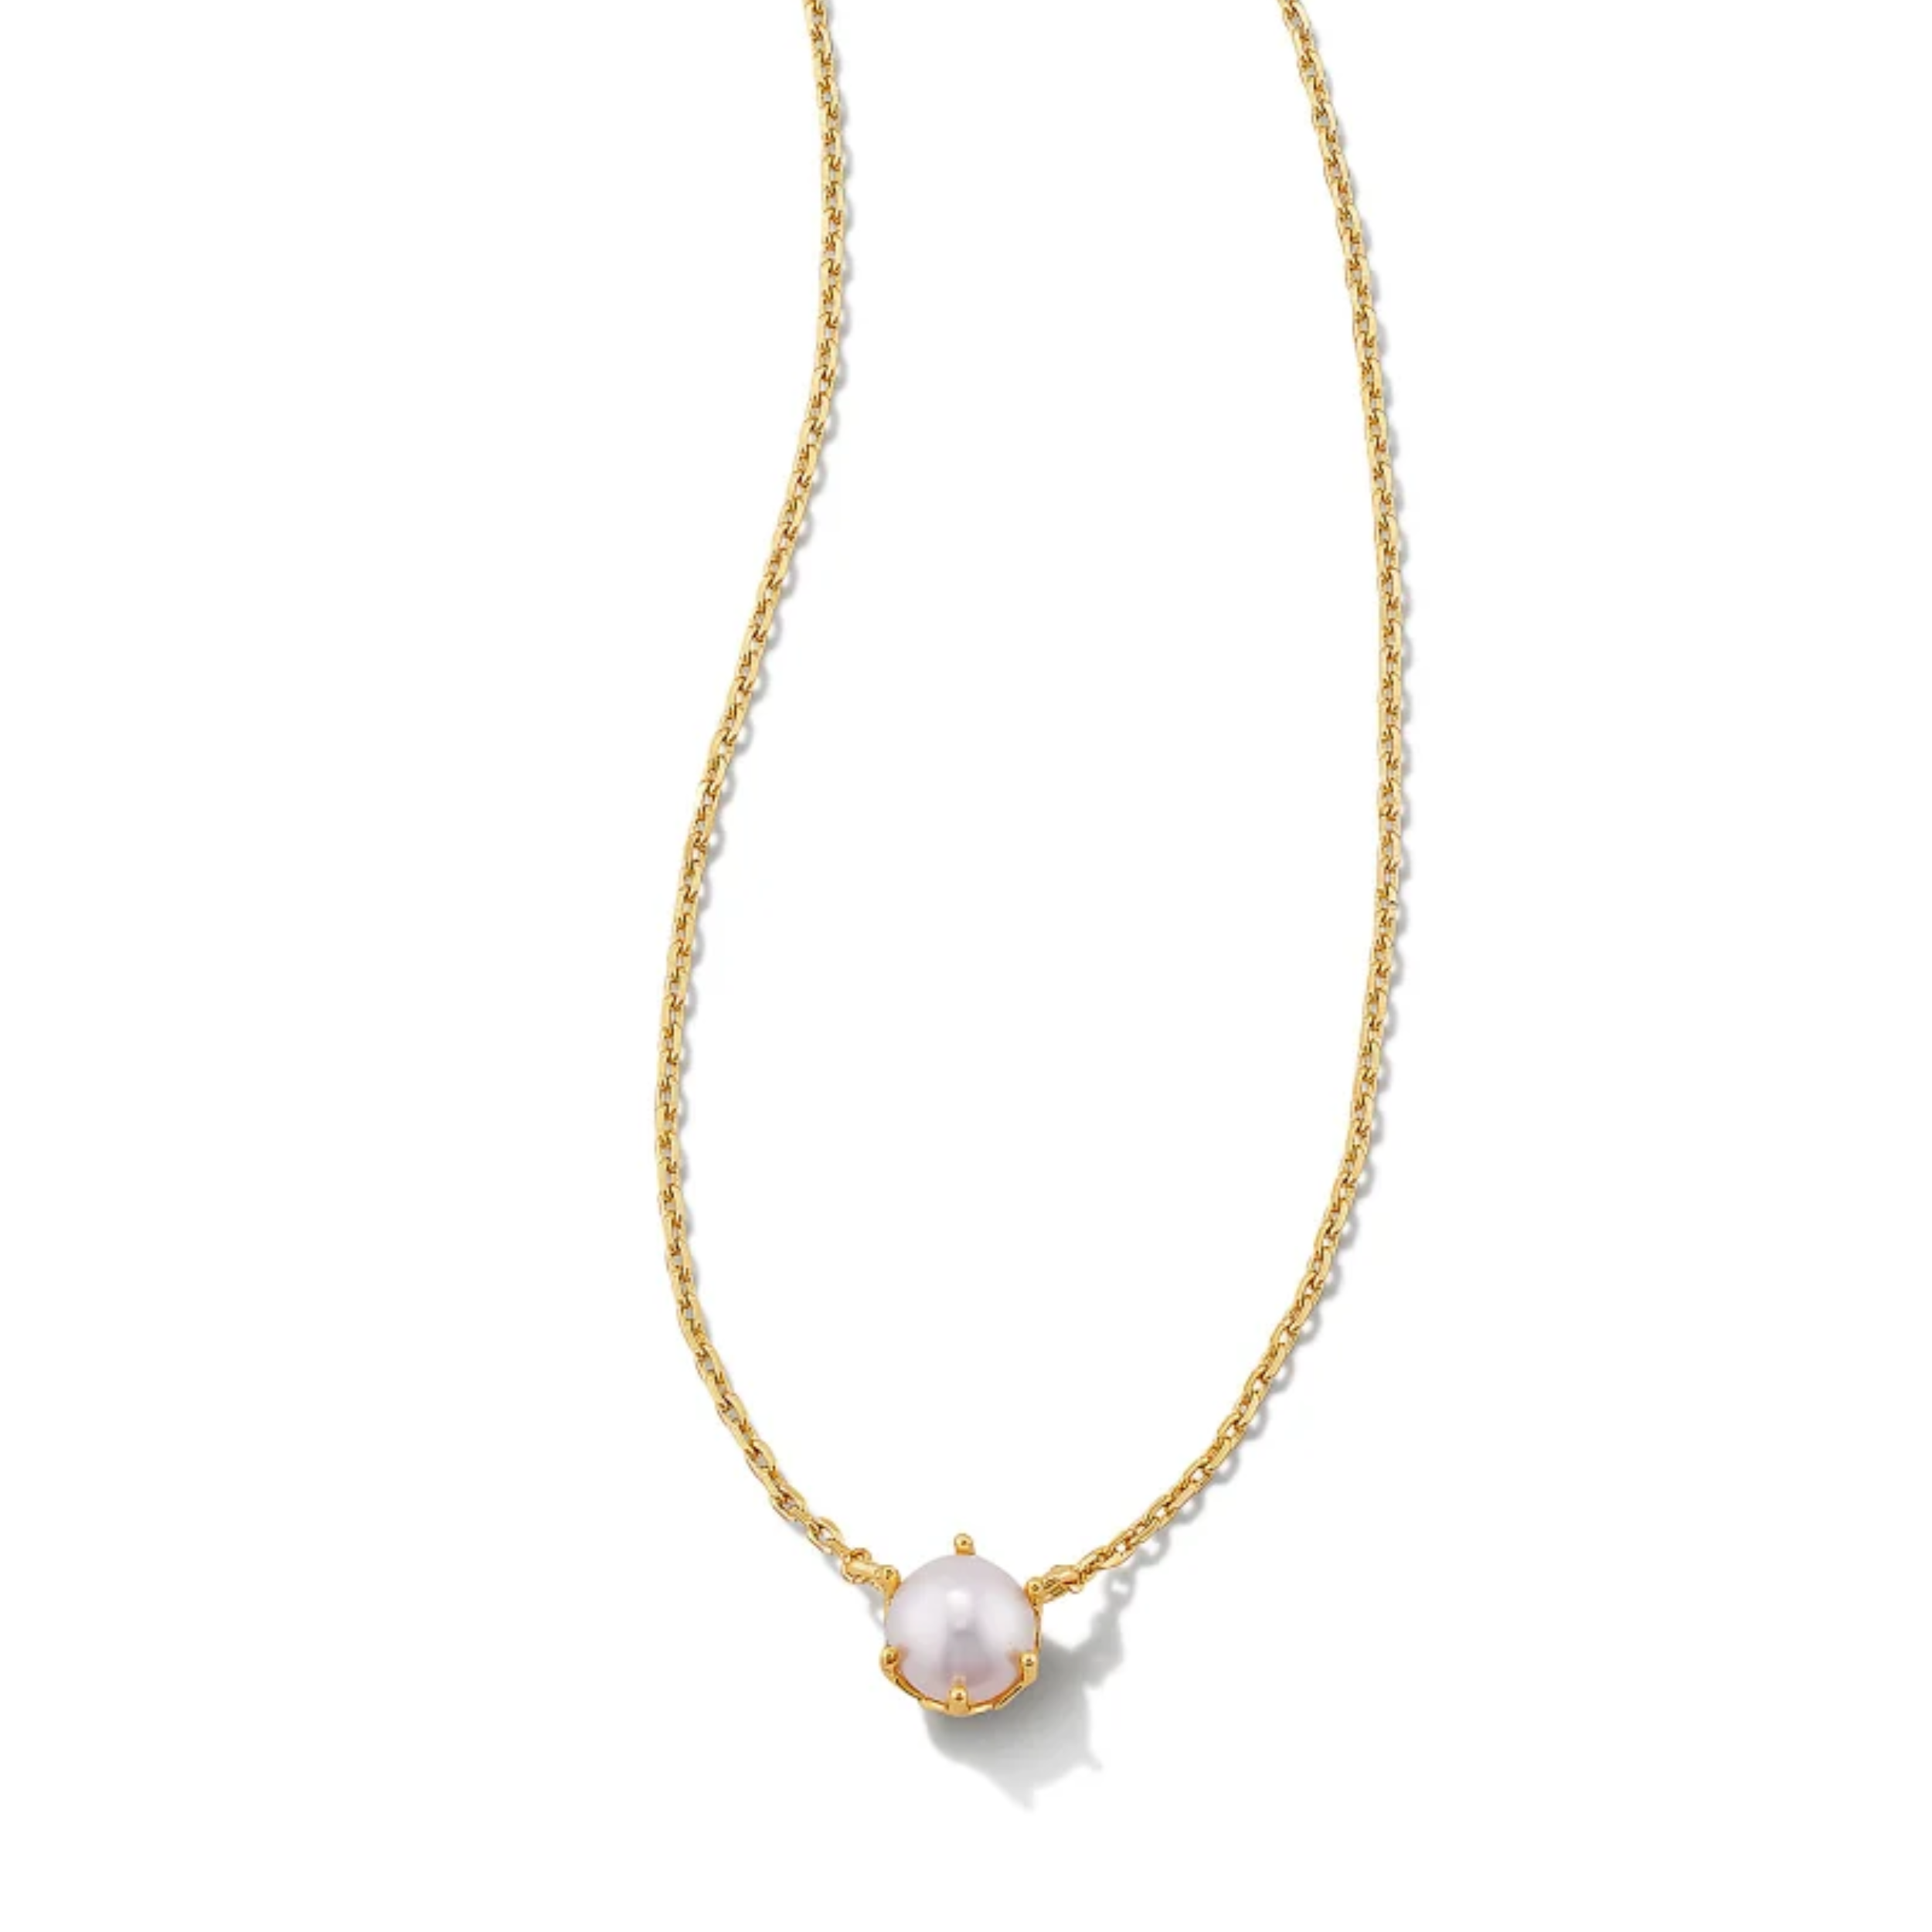 This Ashton Gold Pearl Pendant Necklace in White Pearl by Kendra Scott is pictured on a white background.